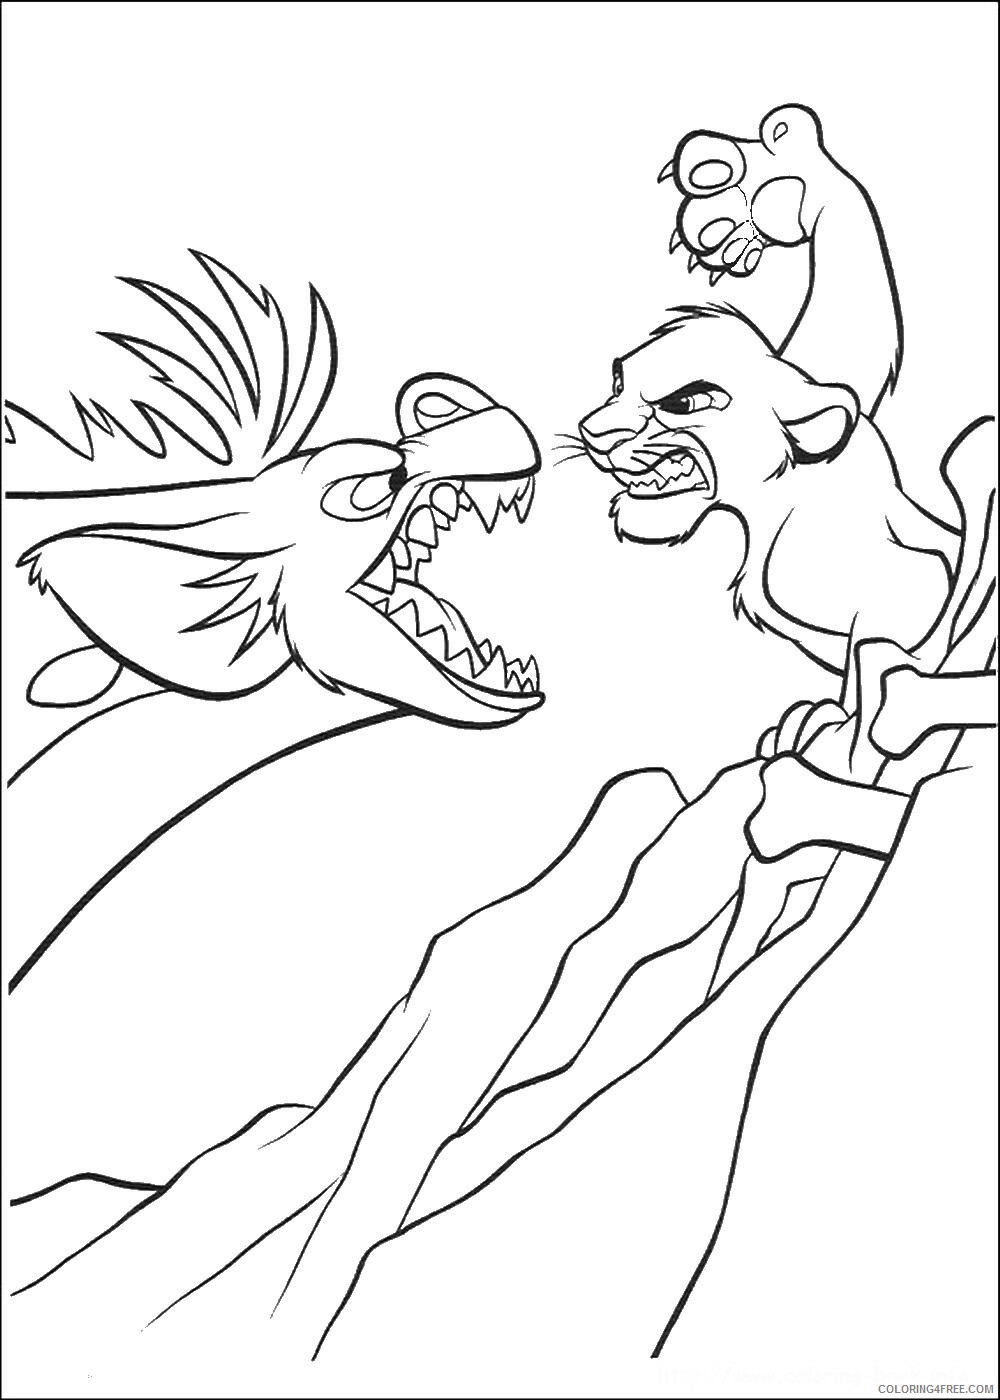 The Lion King Coloring Pages TV Film lionking_52 Printable 2020 09174 Coloring4free